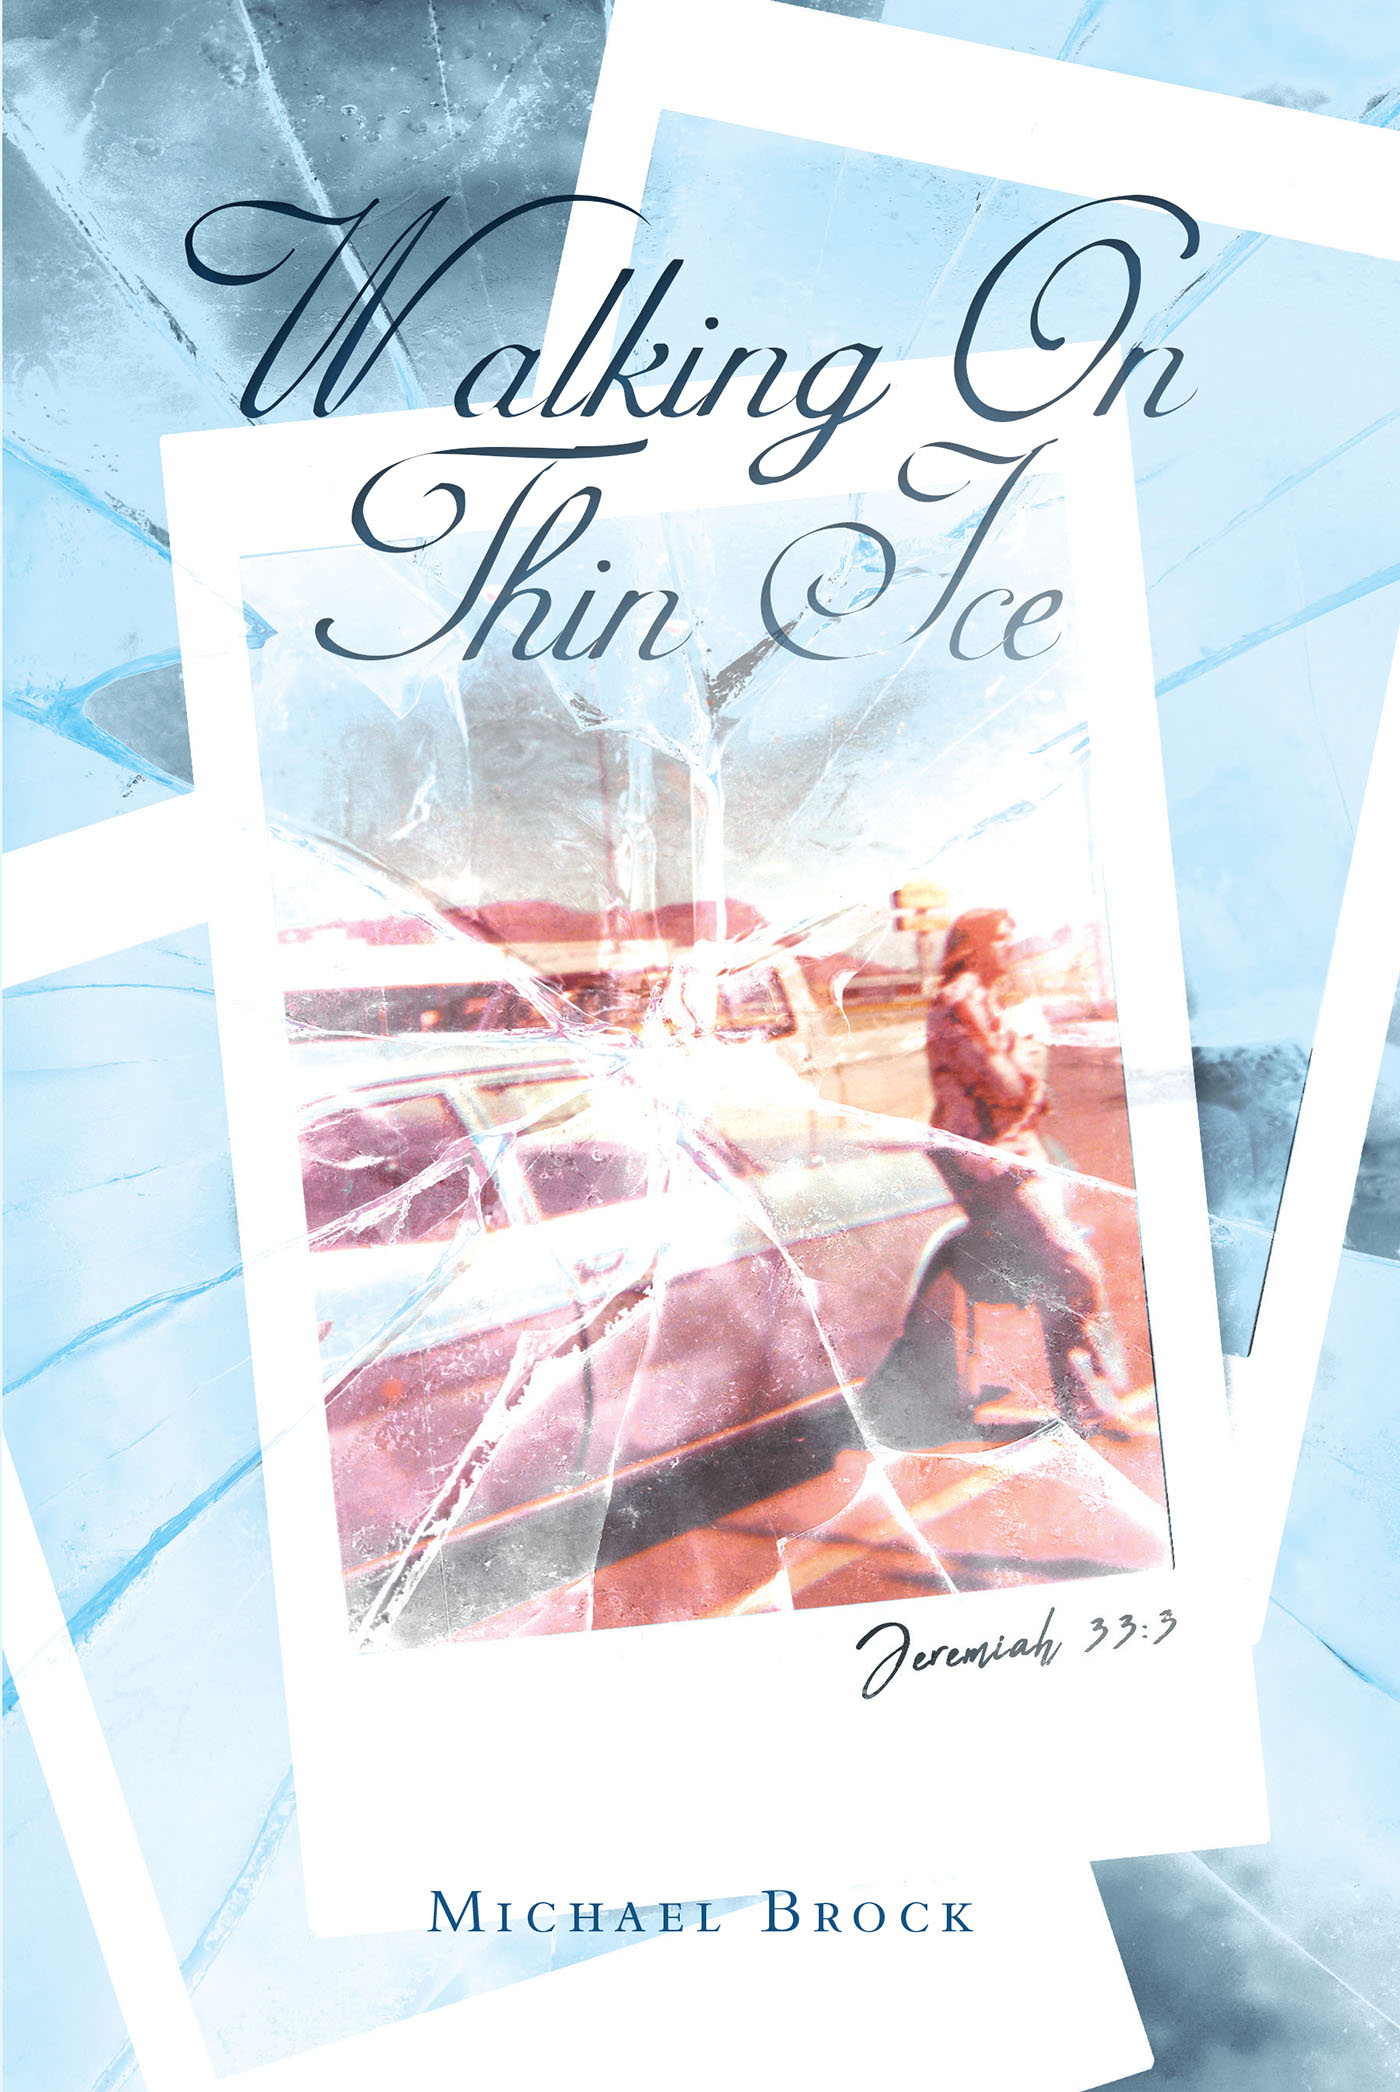 Michael Brock’s Newly Released "Walking On Thin Ice" is a Fascinating Account of a Life of Unexpected Challenges and Surprising Blessings